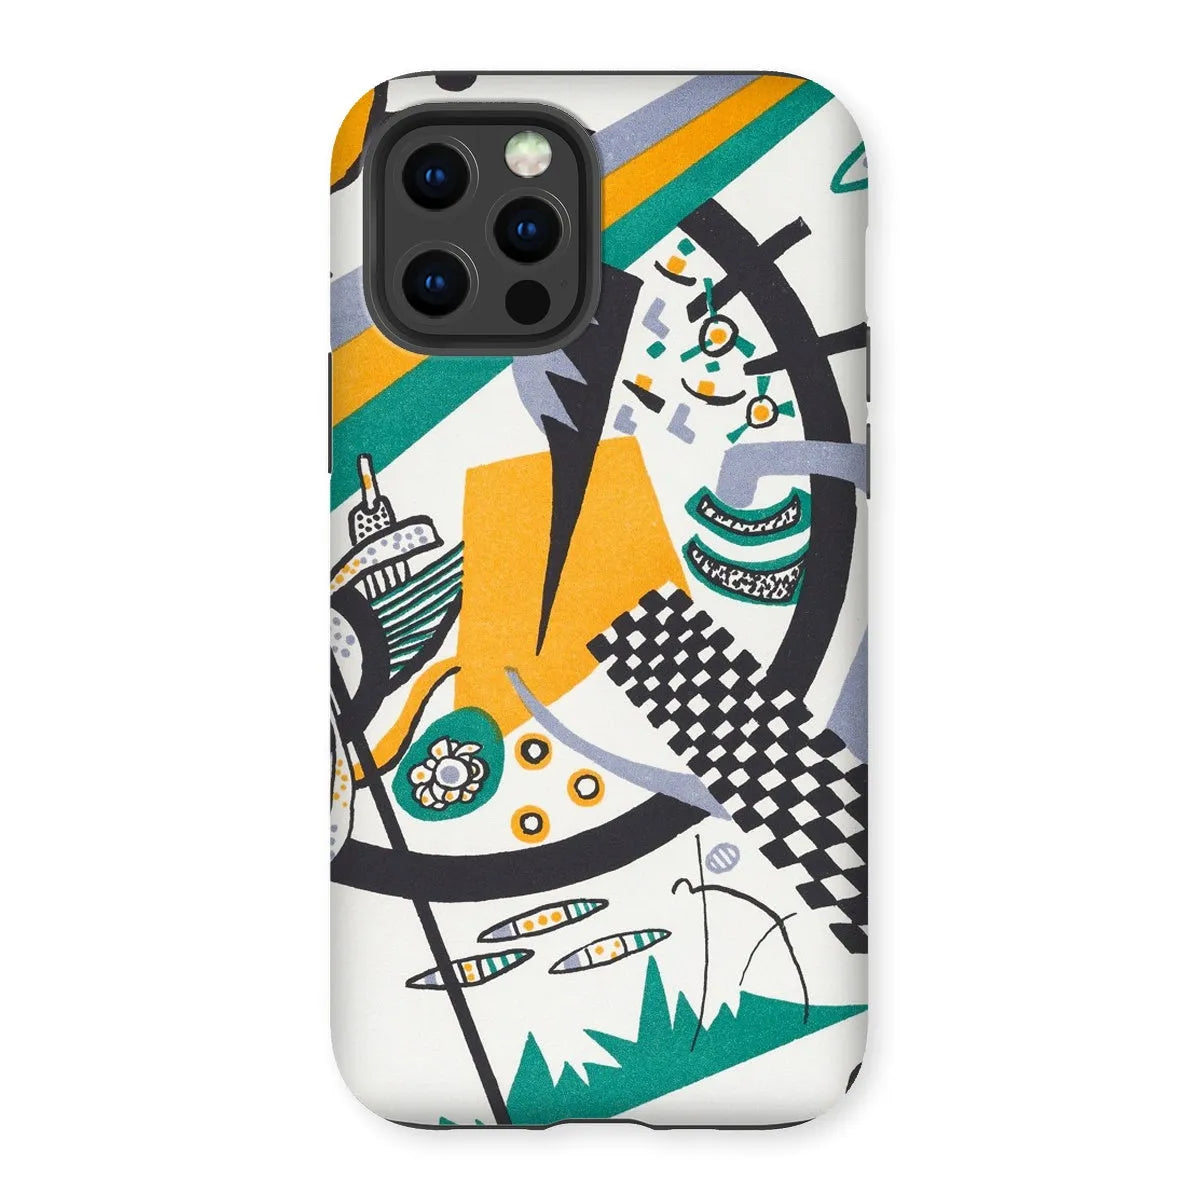 Small Worlds Iv - Expressionist Phone Case - Wassily Kandinsky - Iphone 12 Pro / Matte - Mobile Phone Cases - Aesthetic